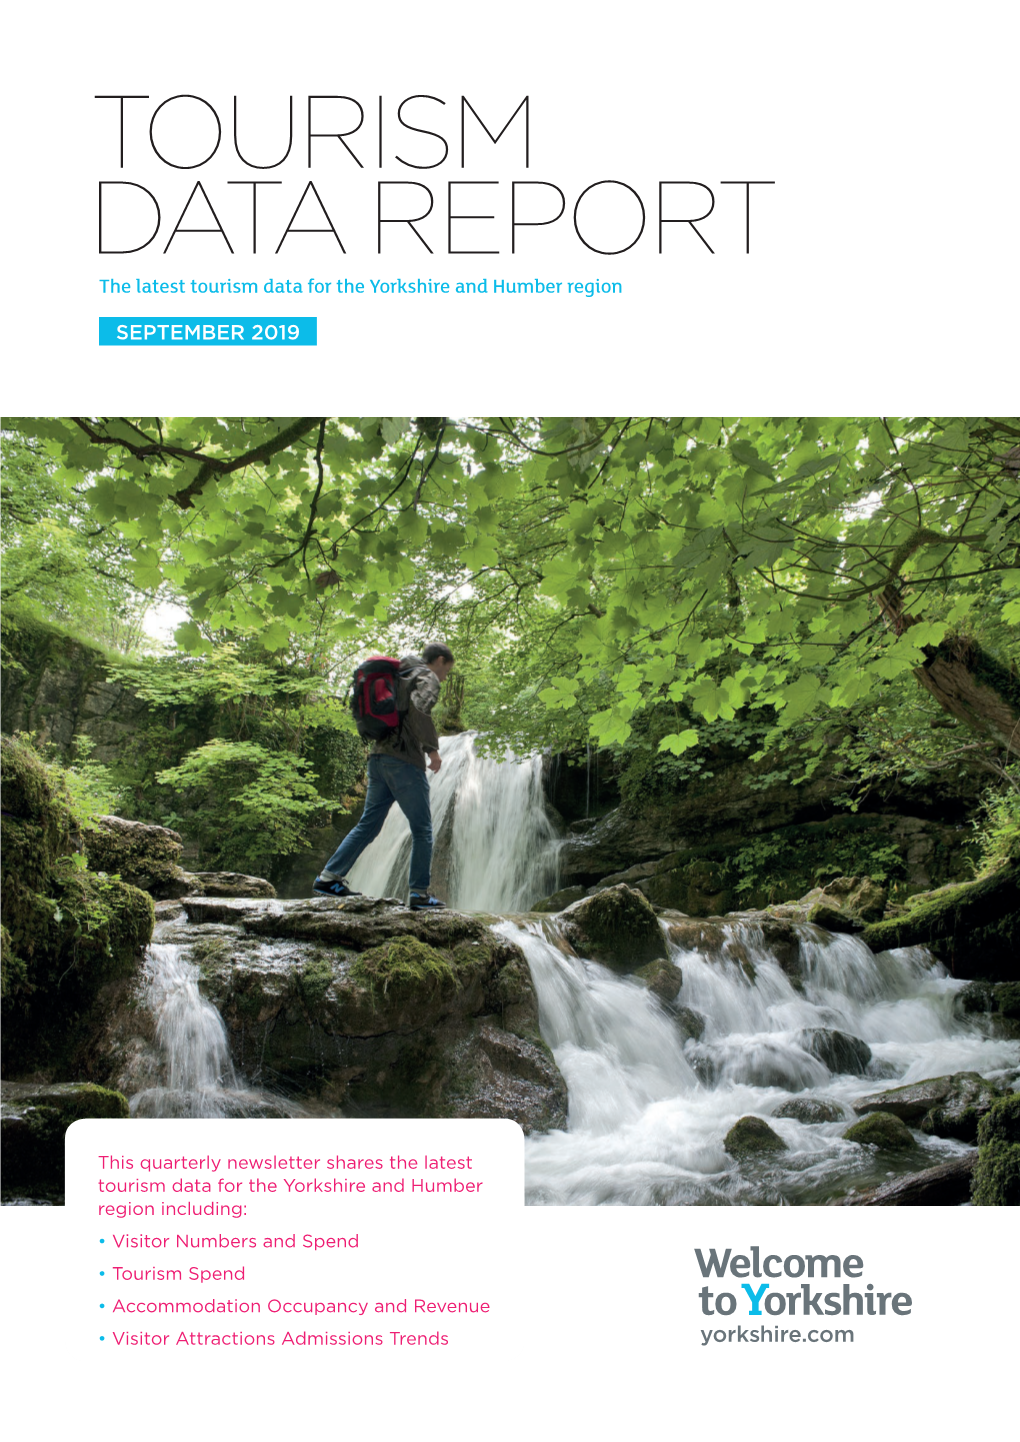 TOURISM DATA REPORT the Latest Tourism Data for the Yorkshire and Humber Region